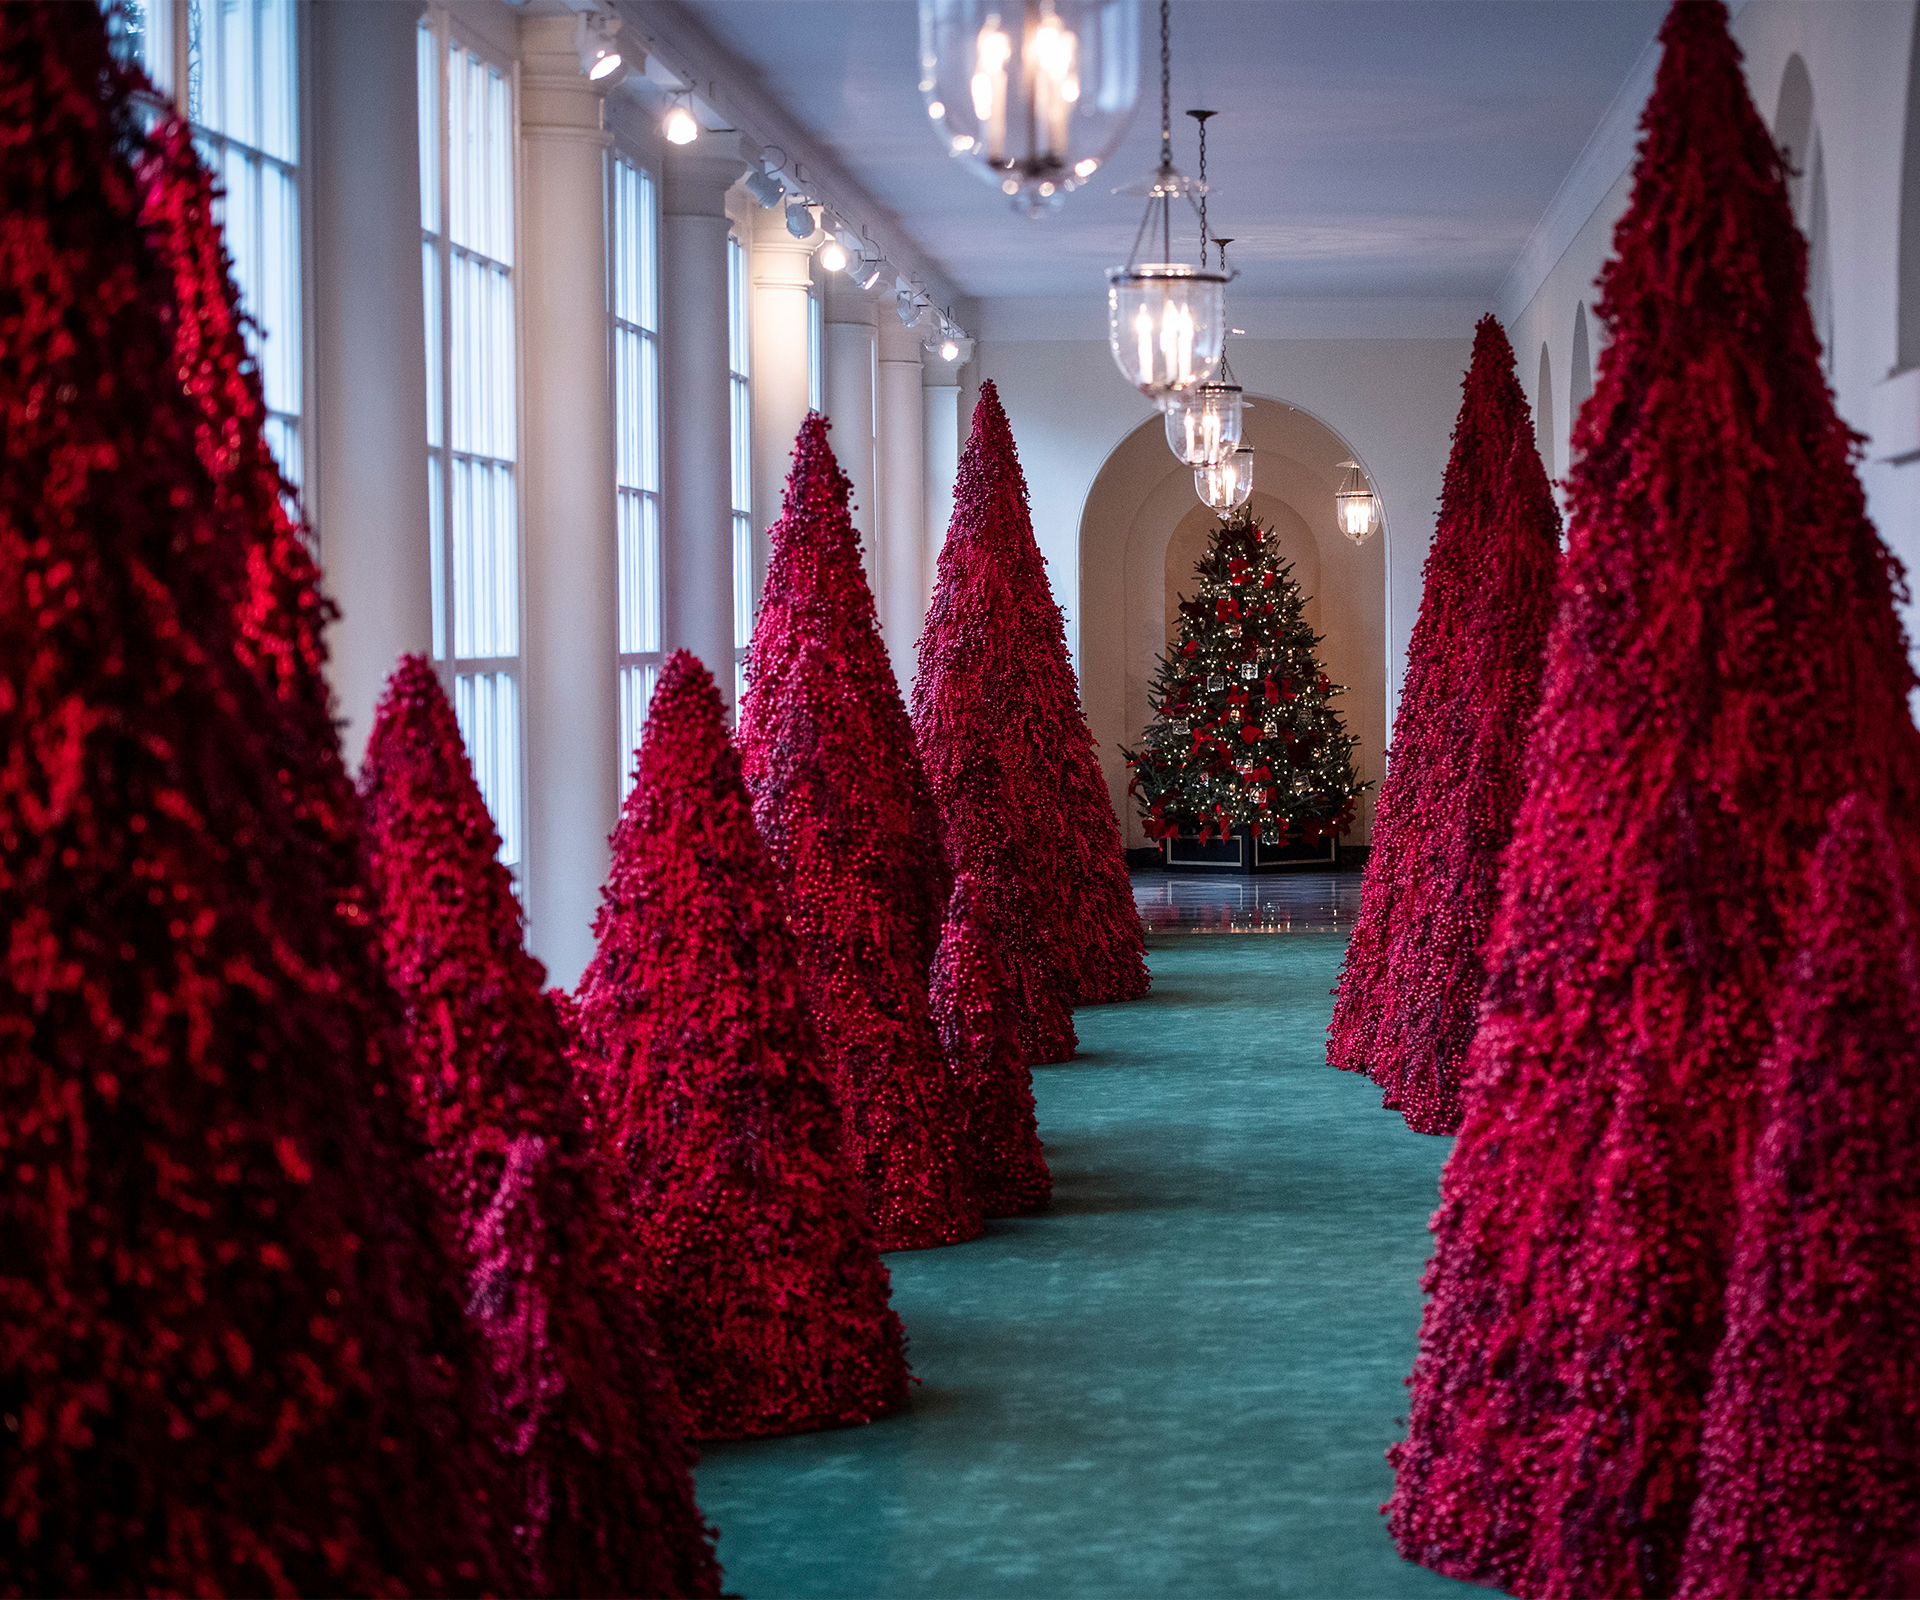 White House Christmas decorations, red trees